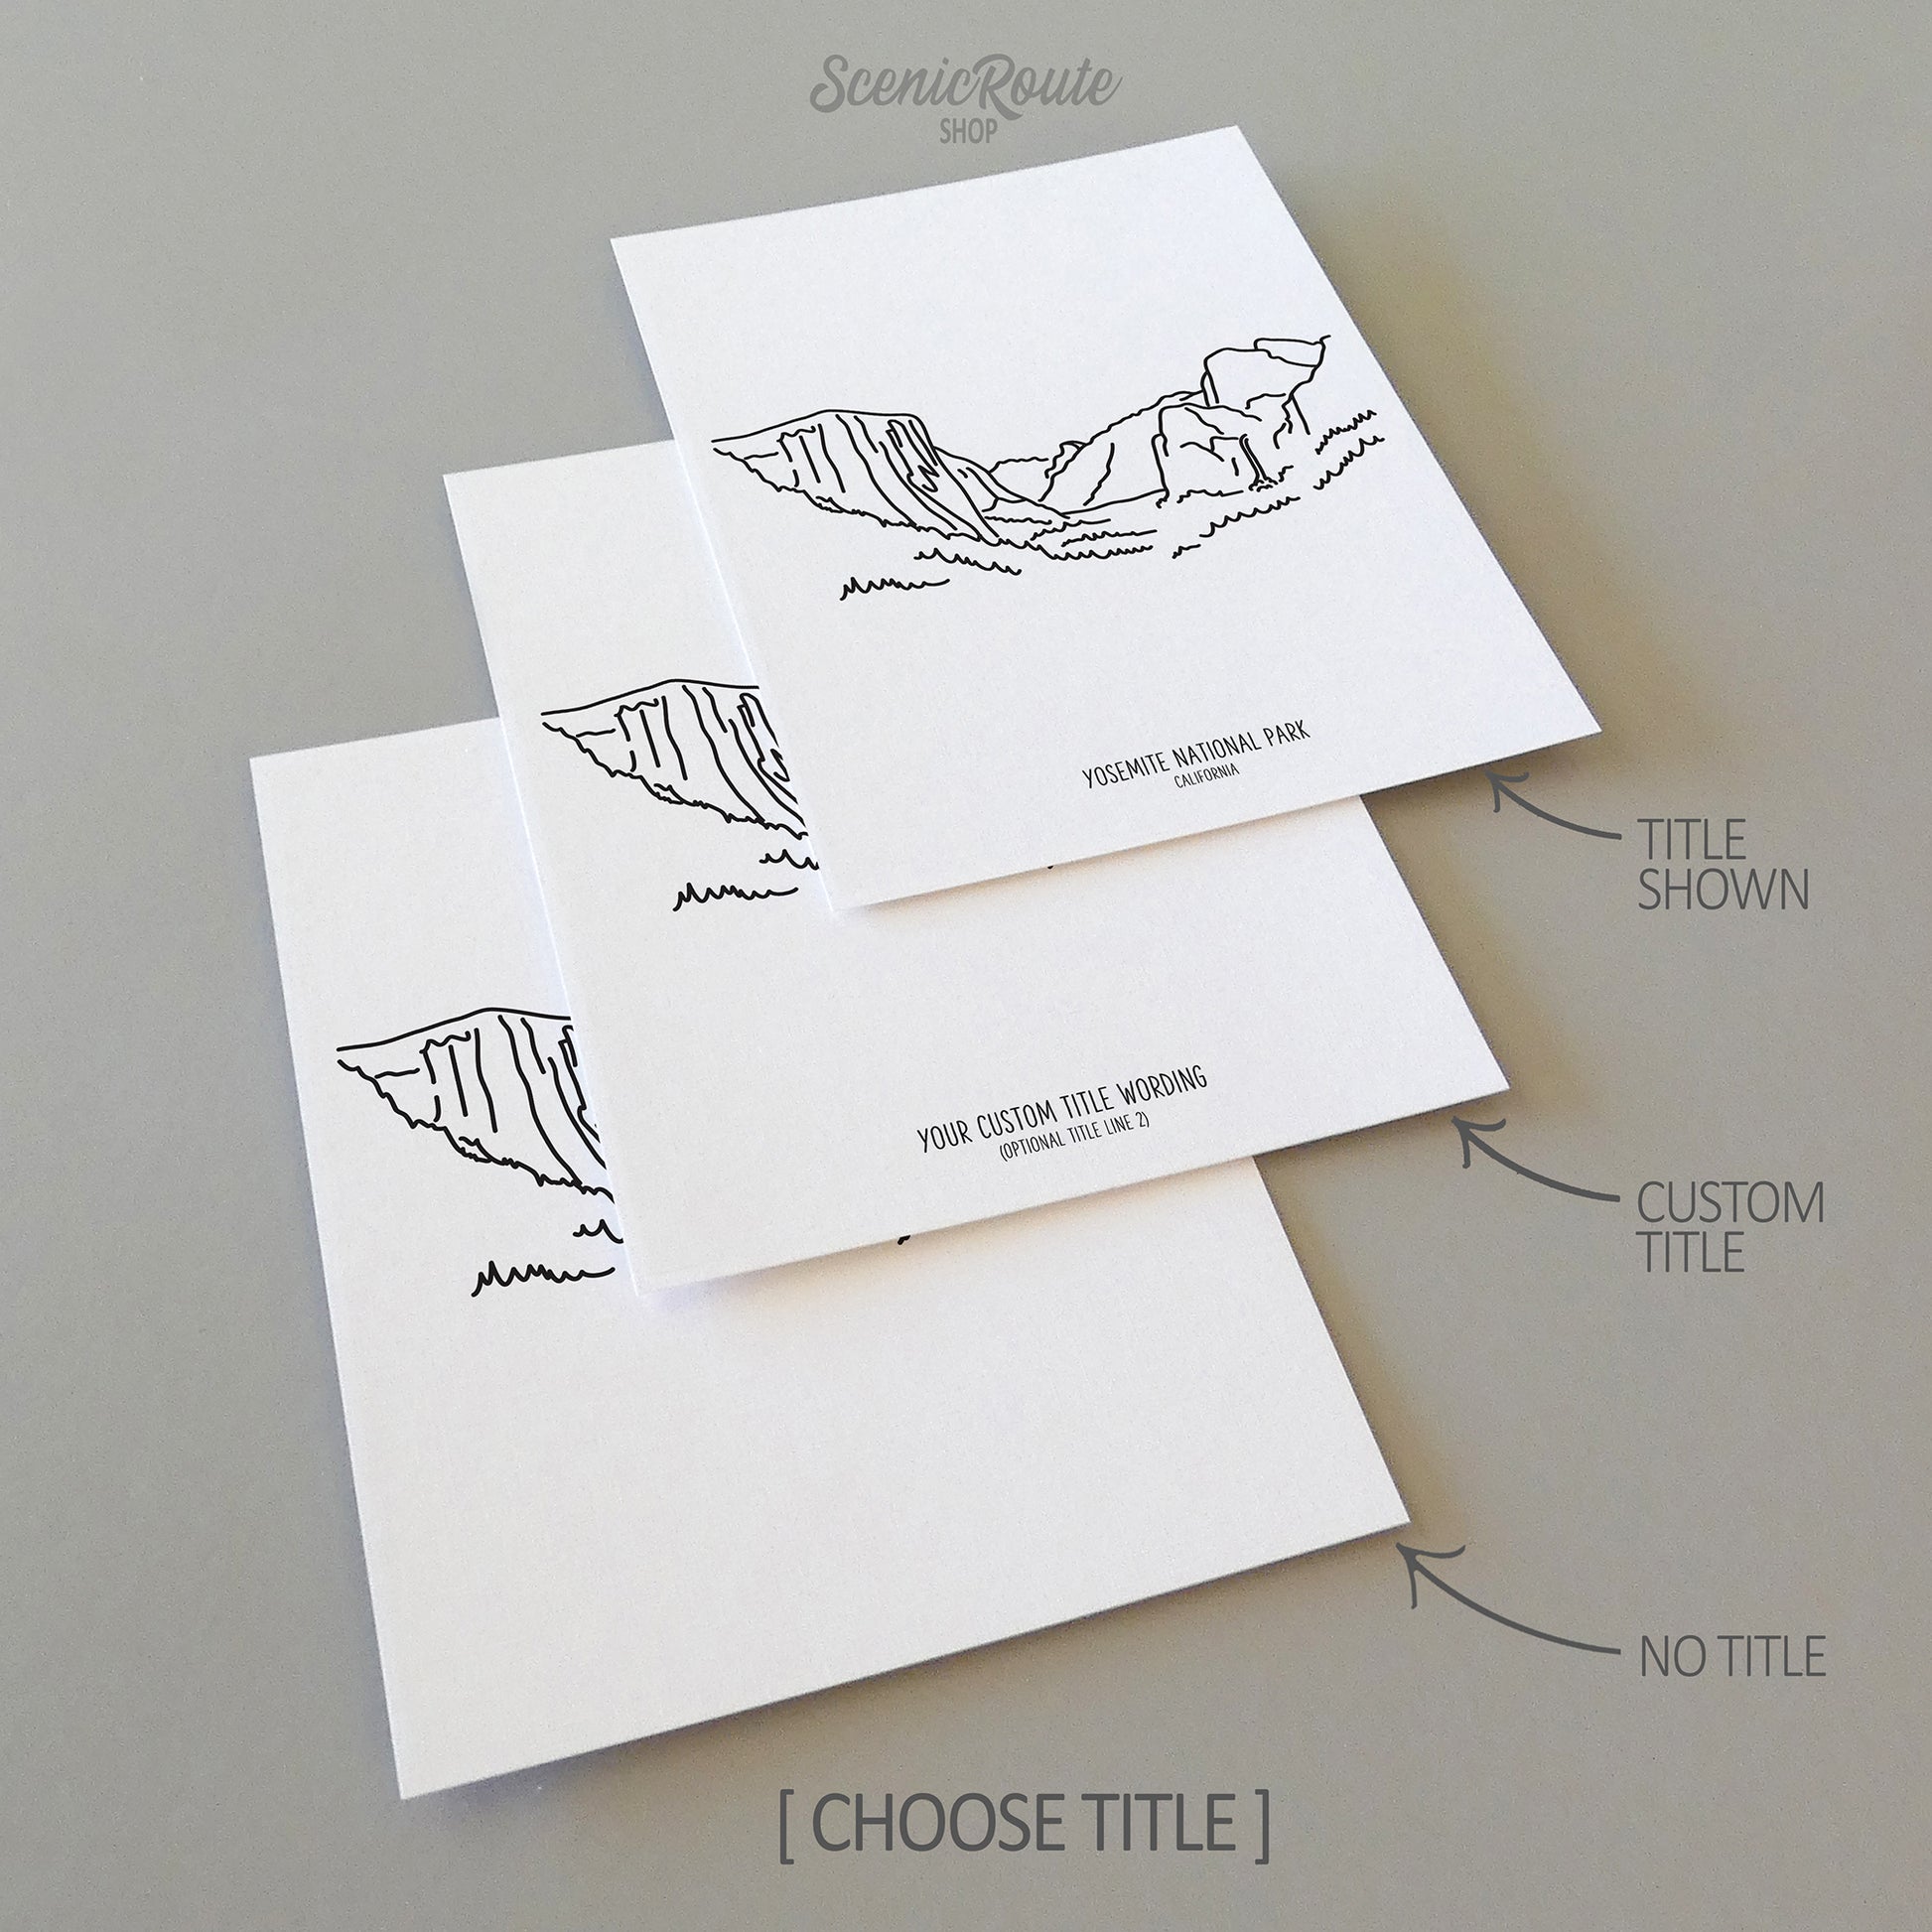 Three line art drawings of Yosemite National Park on white linen paper with a gray background. The pieces are shown with title options that can be chosen and personalized.